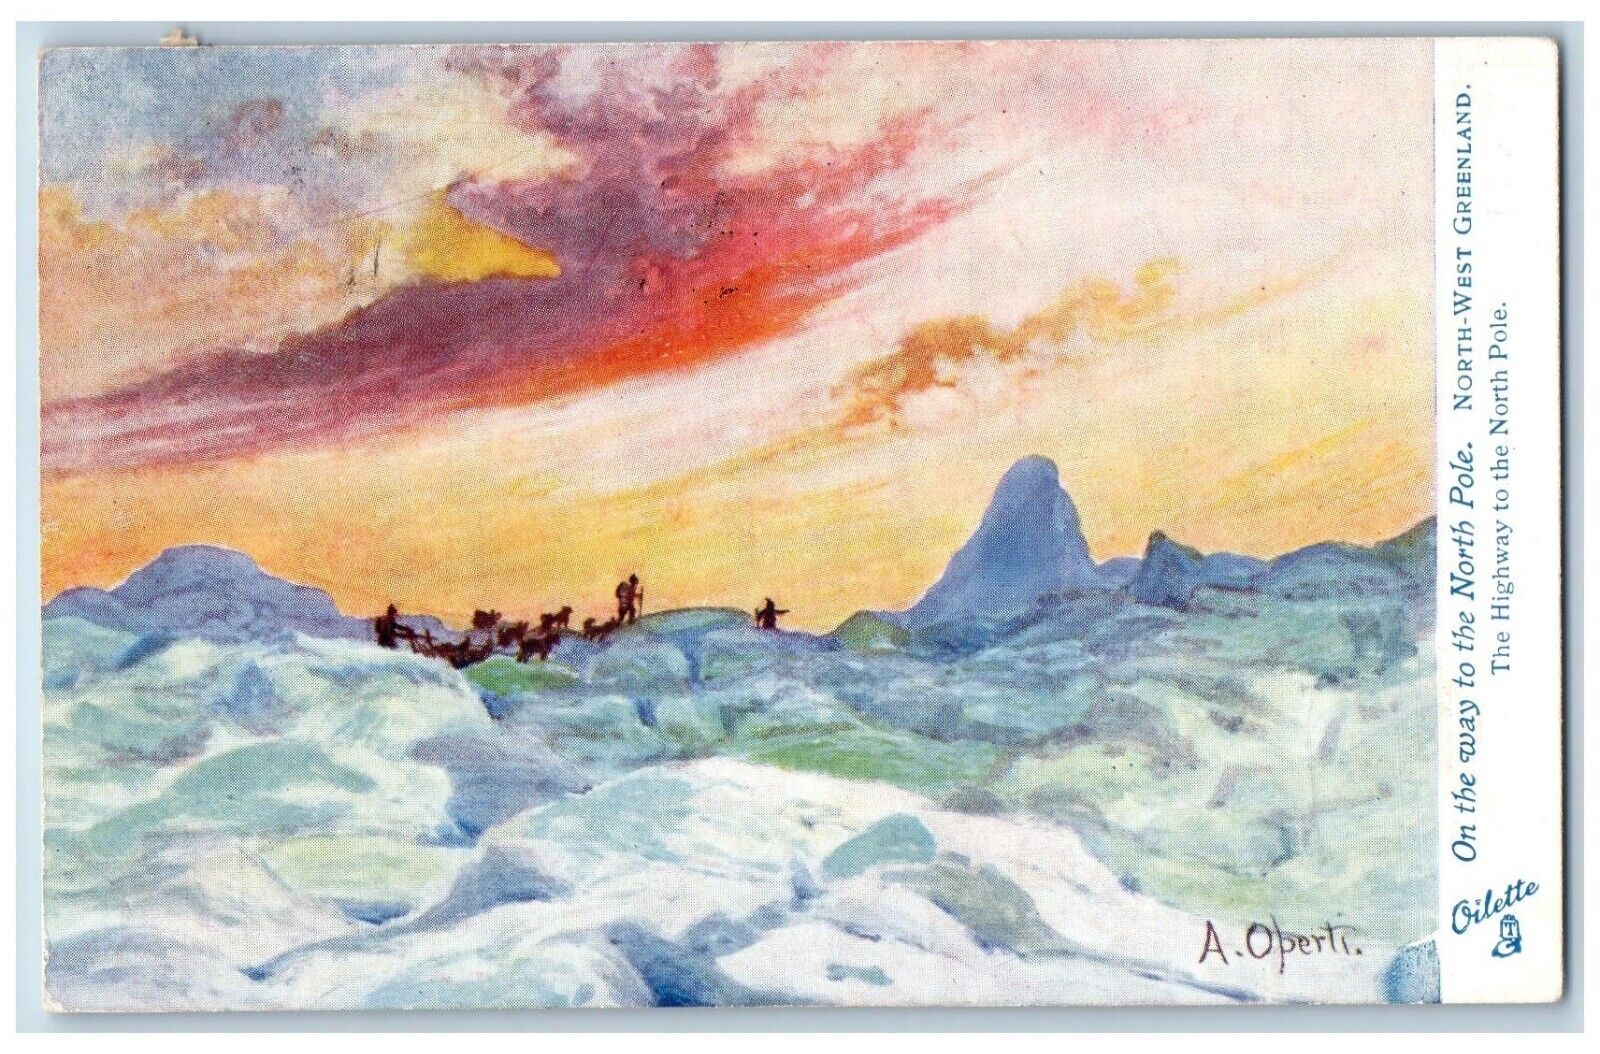 Albert Operti Signed Postcard On The Way To The North Pole Winter Oilette Tuck